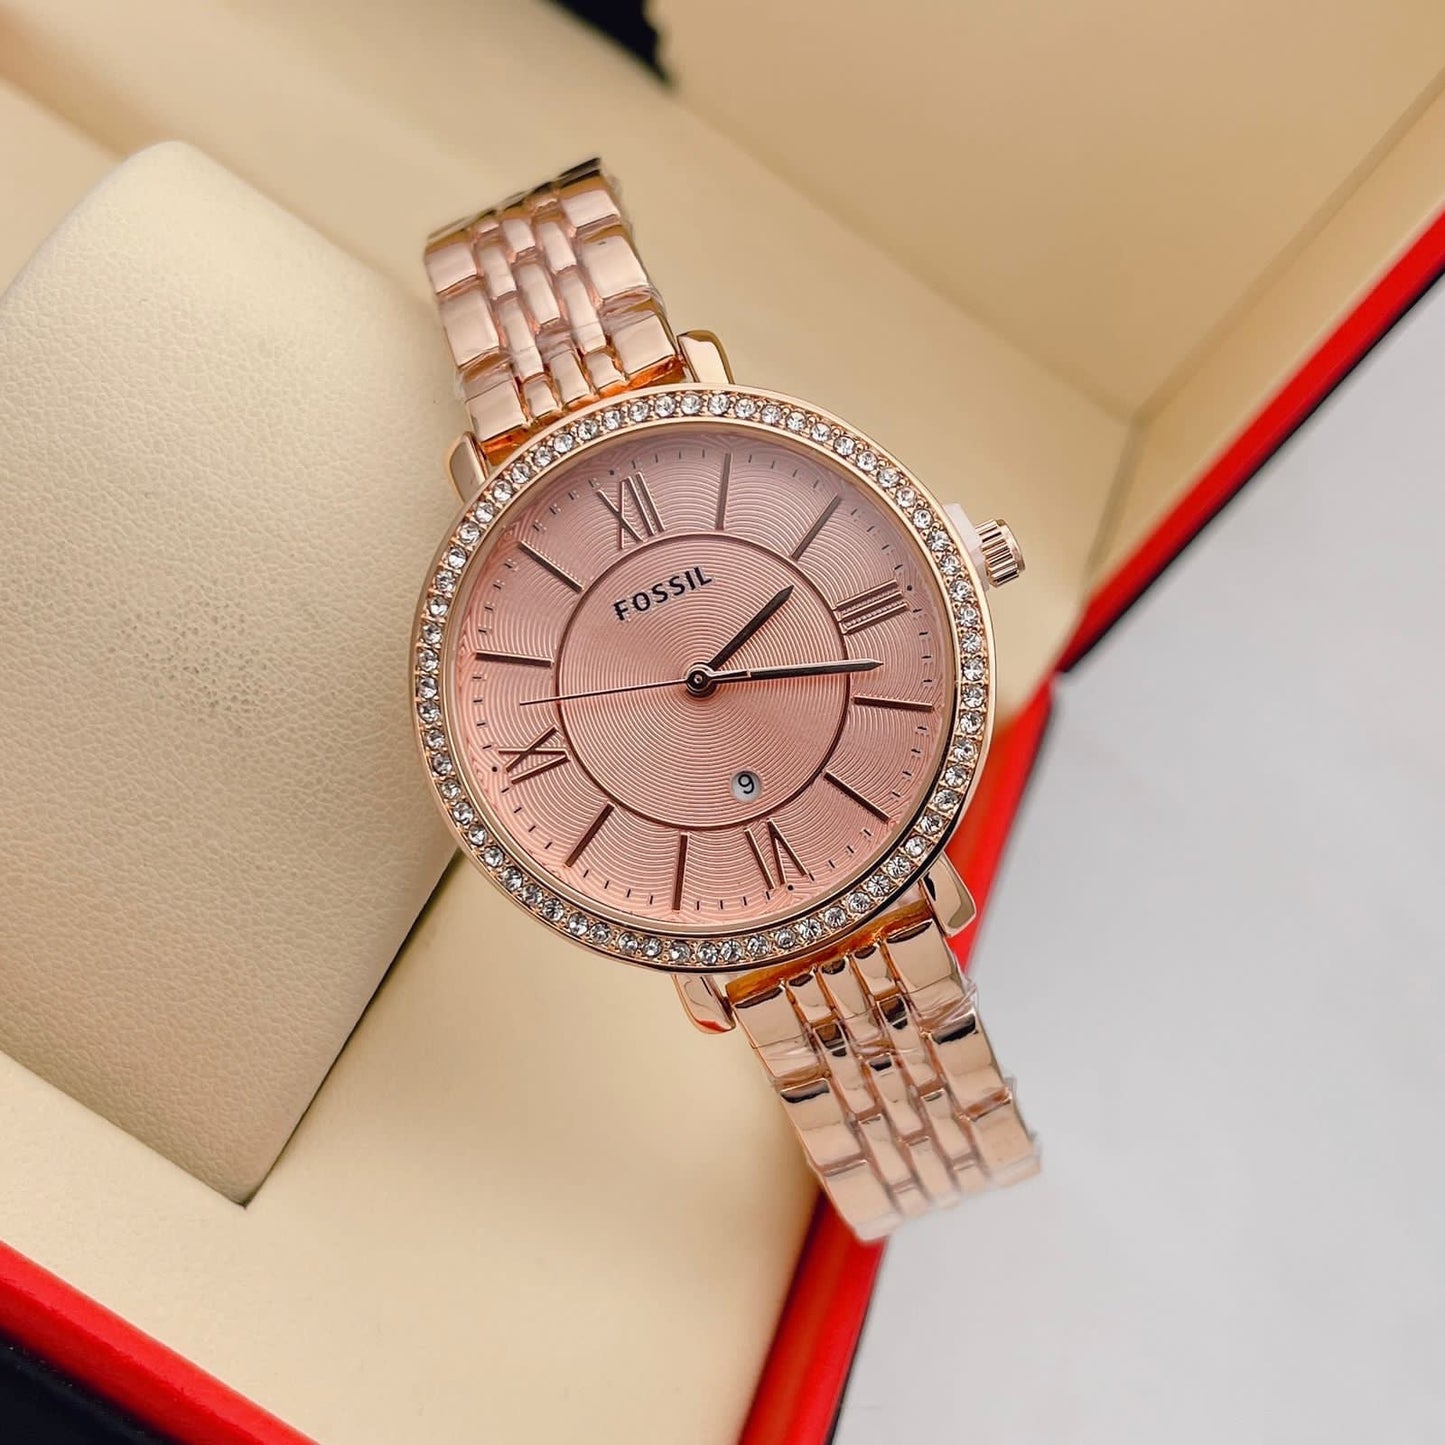 Fossil Rose Gold Metal Diamond Strap Watch For Women's ES3546 Design White Dial For Girl or Woman Best Gift Date Watch